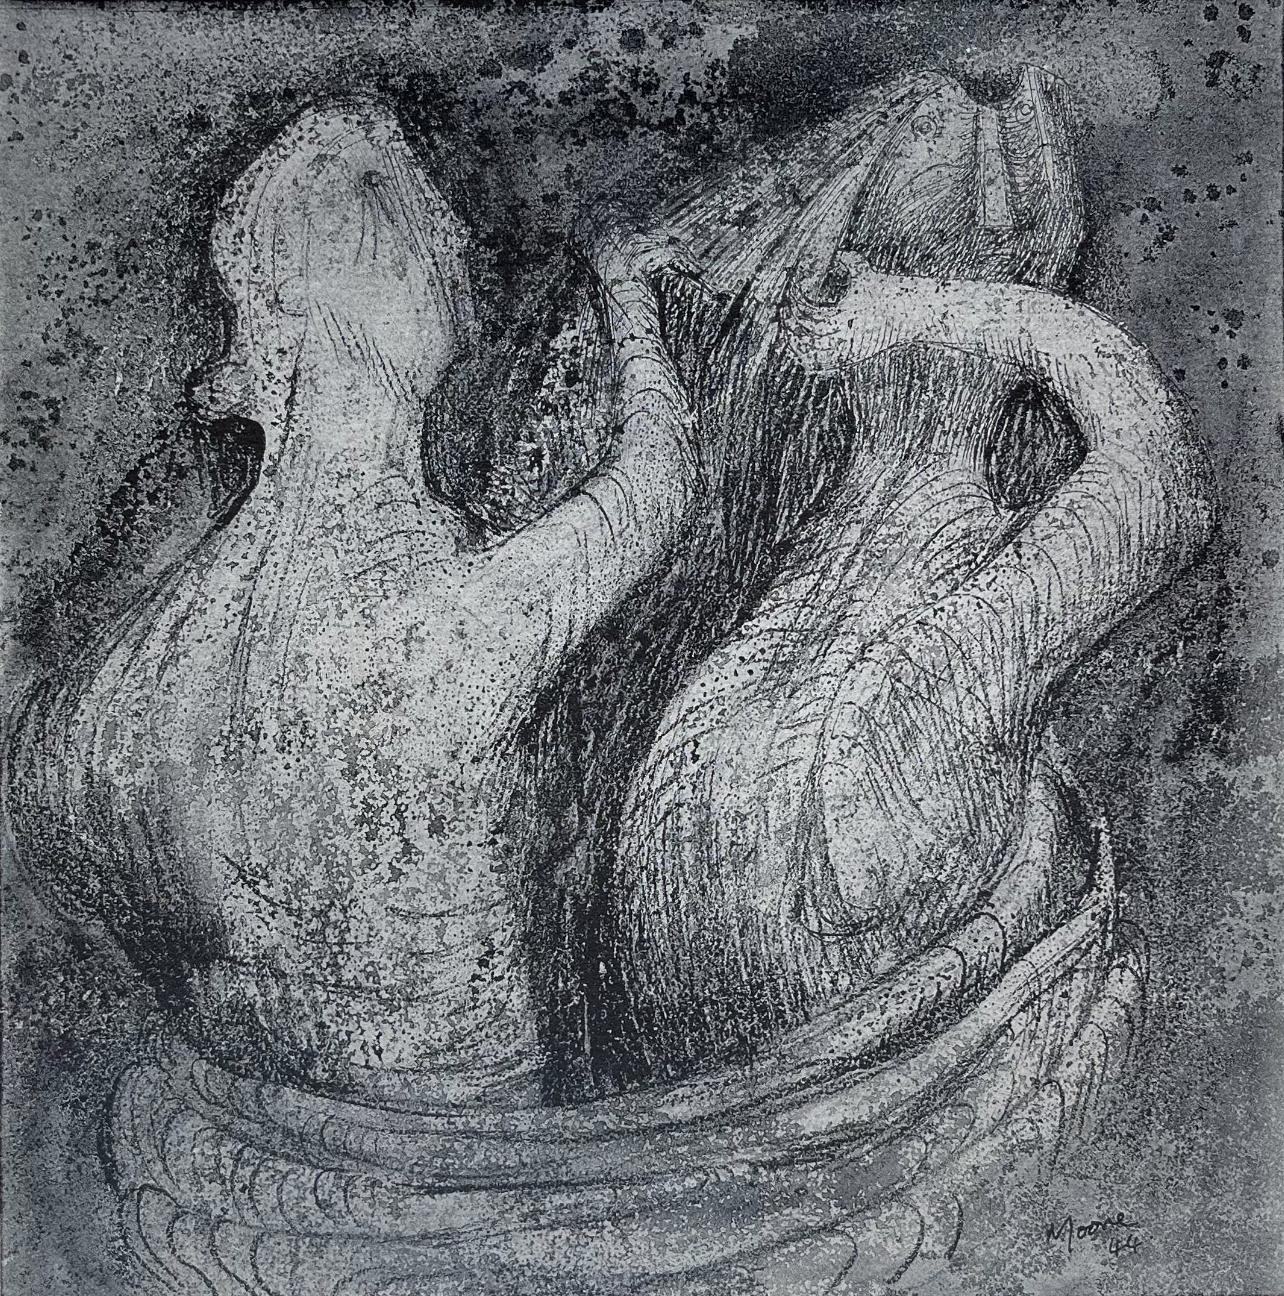 Lithograph on wove paper. Unsigned and unnumbered, as issued. Good condition; never framed or matted. Notes: From the folio, The Drawings of Henry Moore, 1946. Published by Curt Valentin, New York; printed by Duenewald Printing Corporation, New